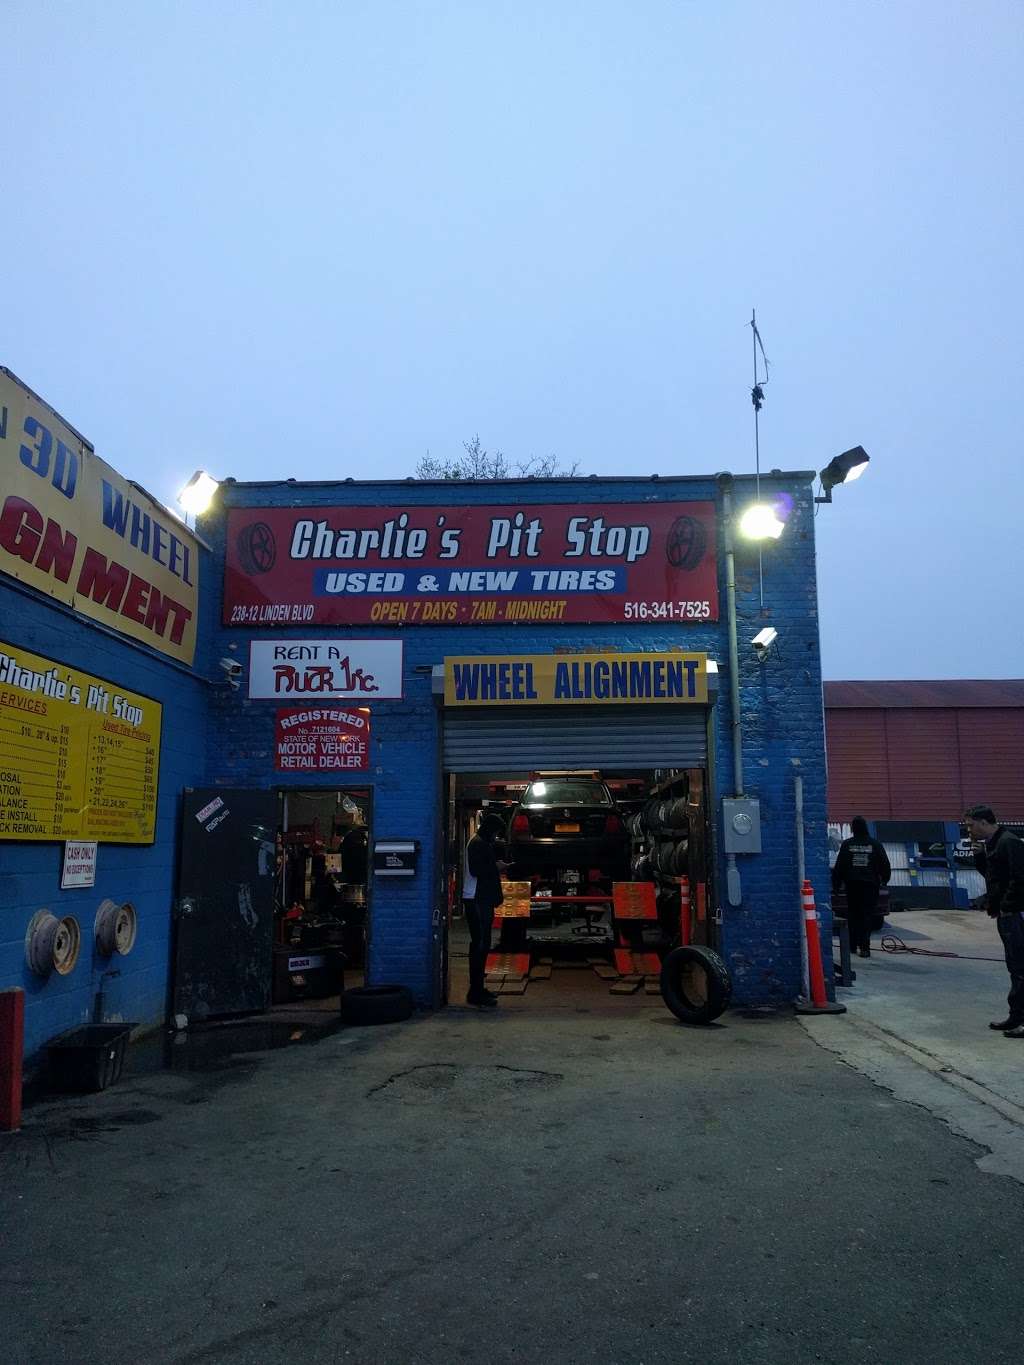 Charlies Pit Stop Tires | 23810 Linden Blvd, Elmont, NY 11003 | Phone: (516) 341-7525